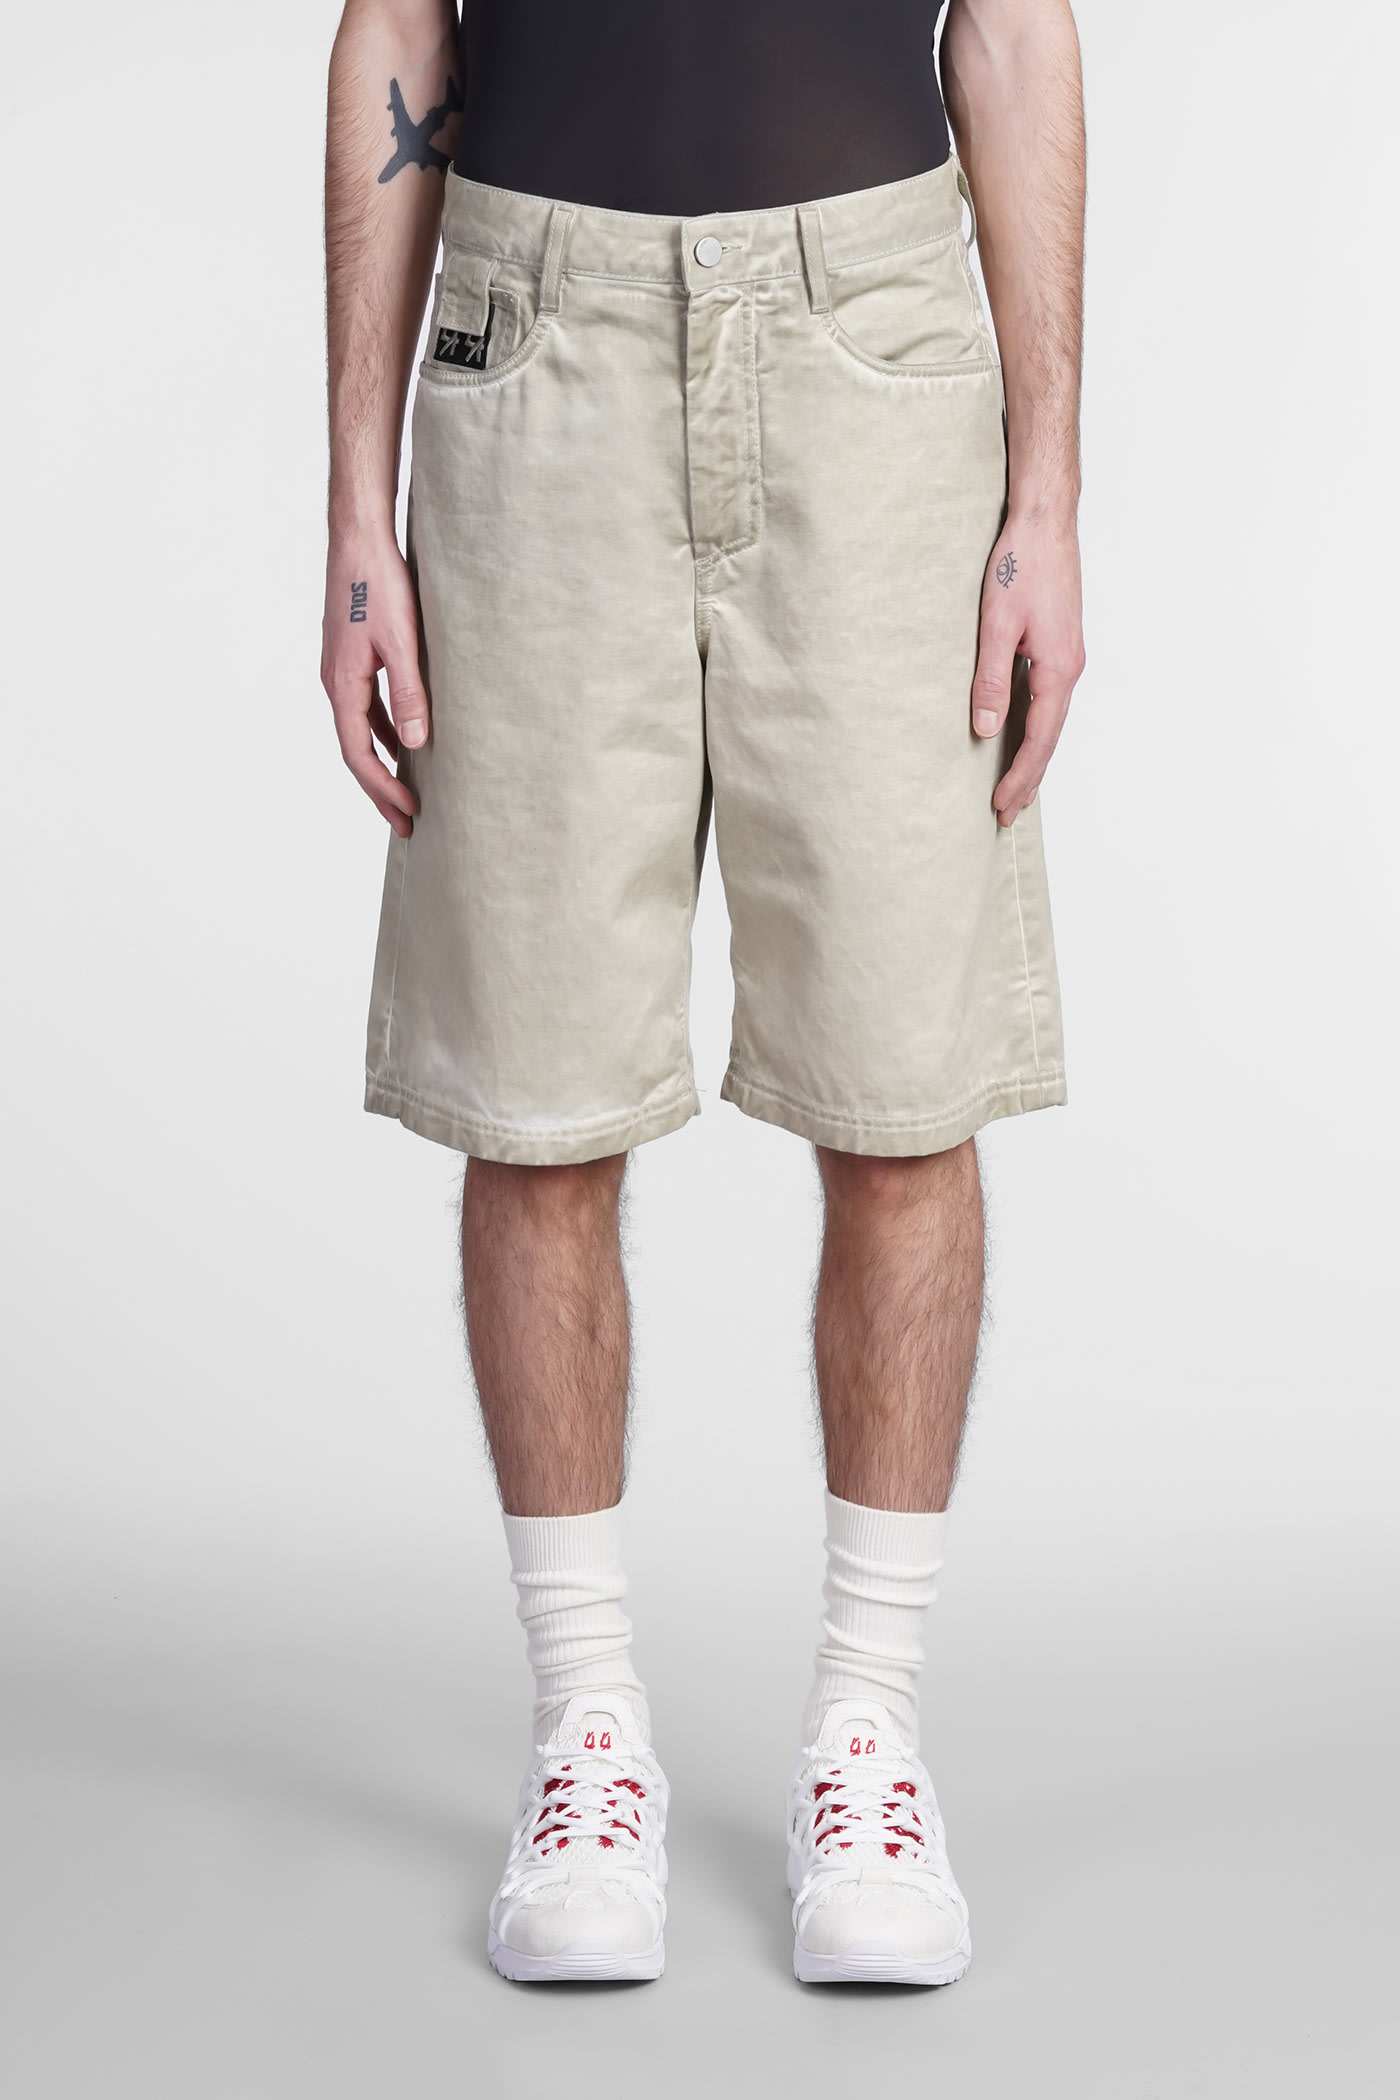 44 LABEL GROUP SHORTS IN BEIGE COTTON